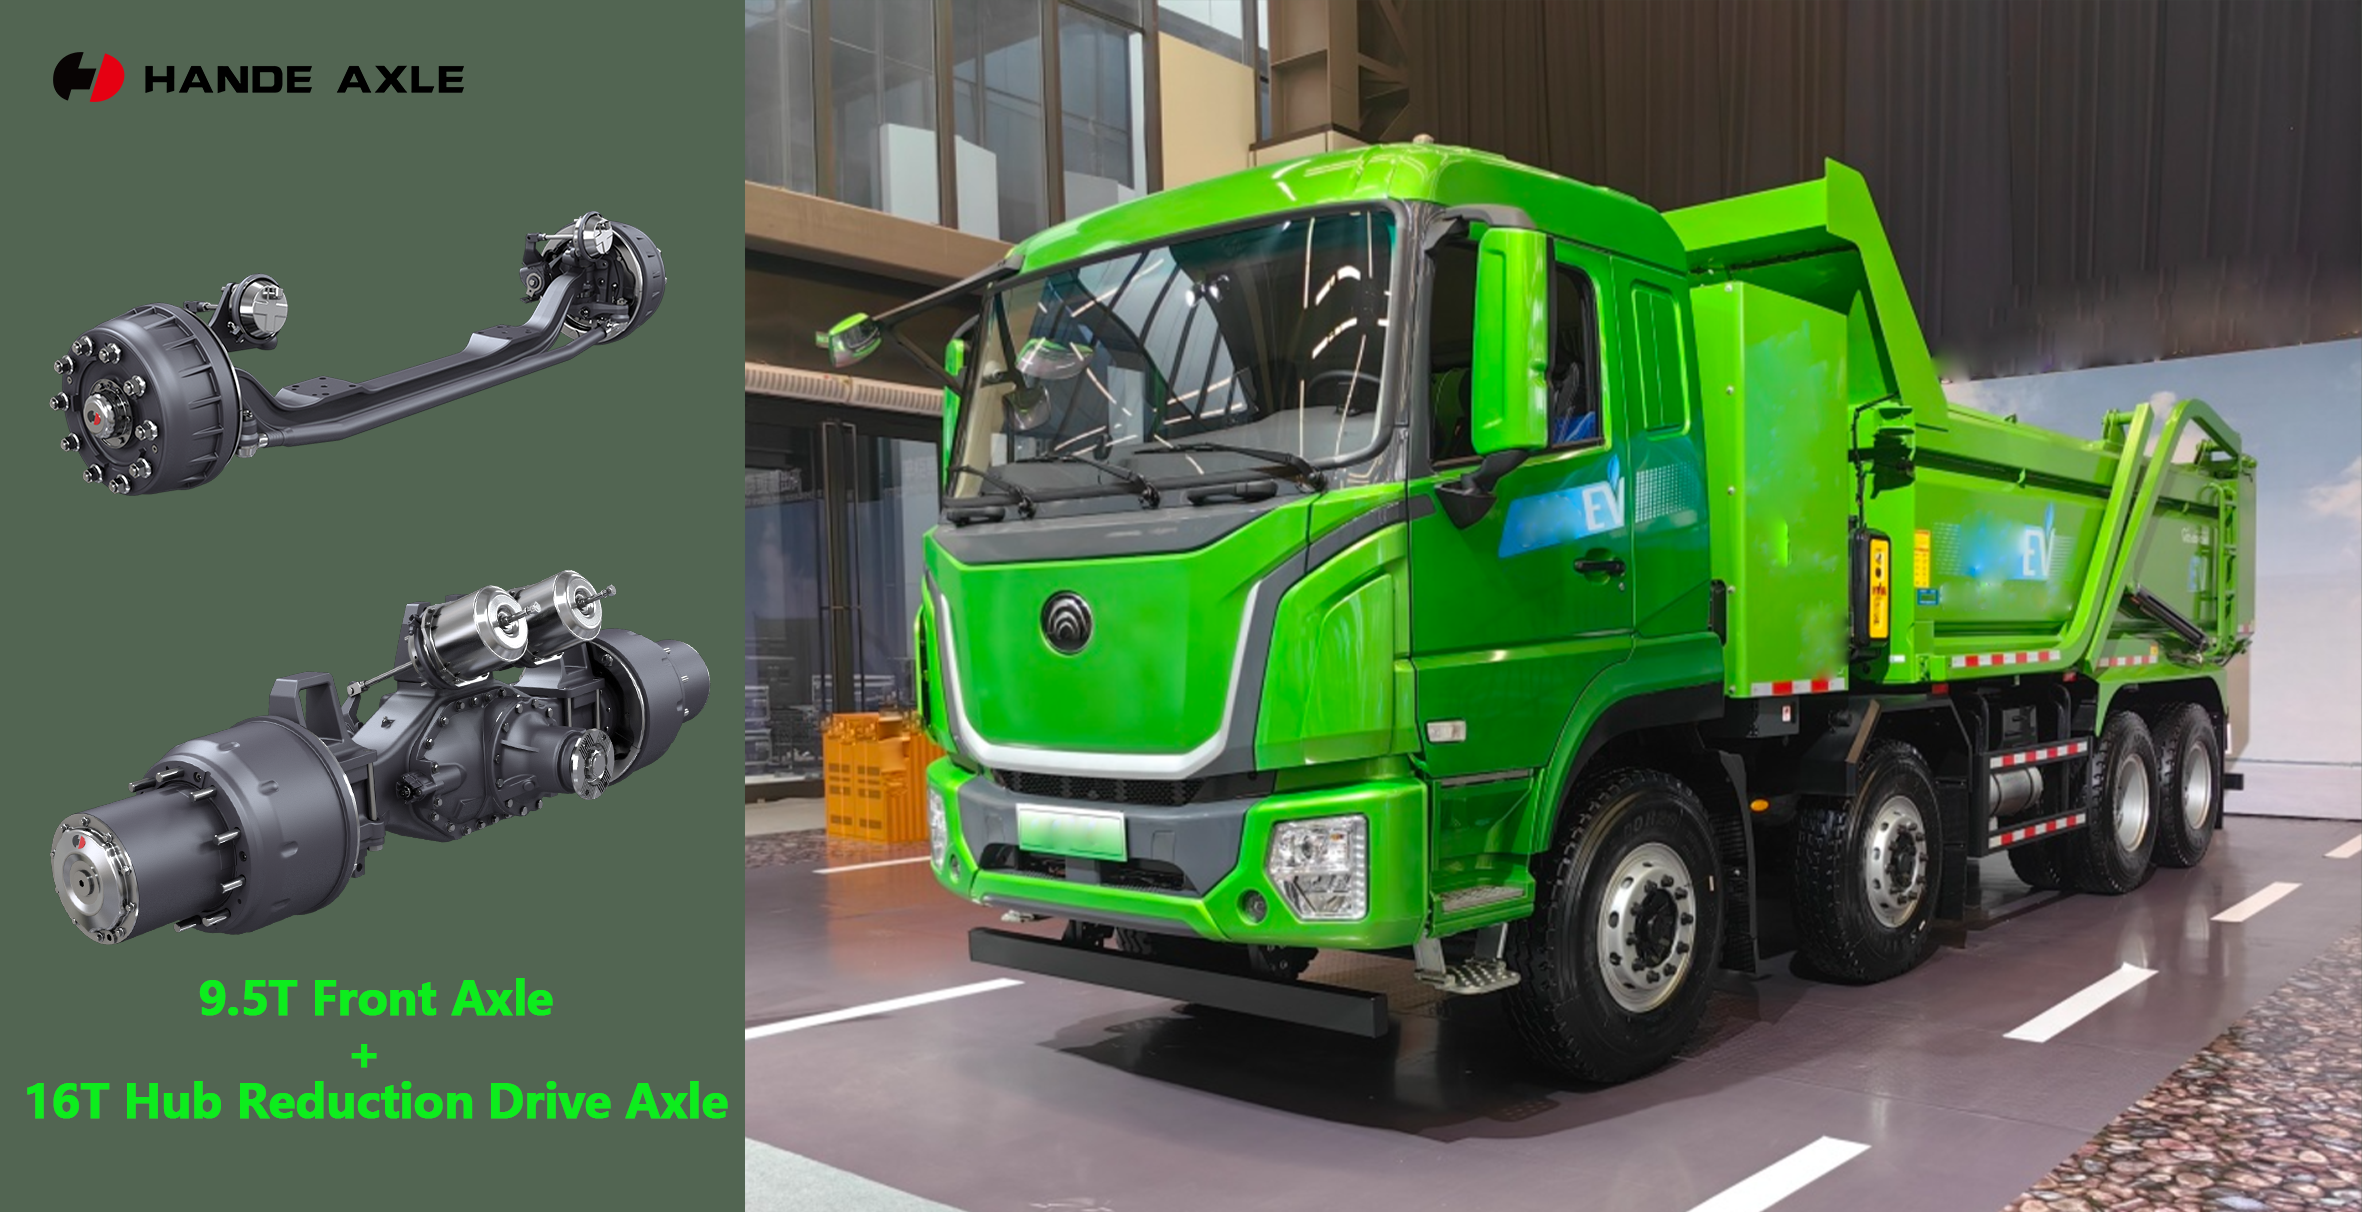 HanDe Dual 9.5Ton Front Axle + 16T Hub Reduction Drive Axle applied to electric dump truck.